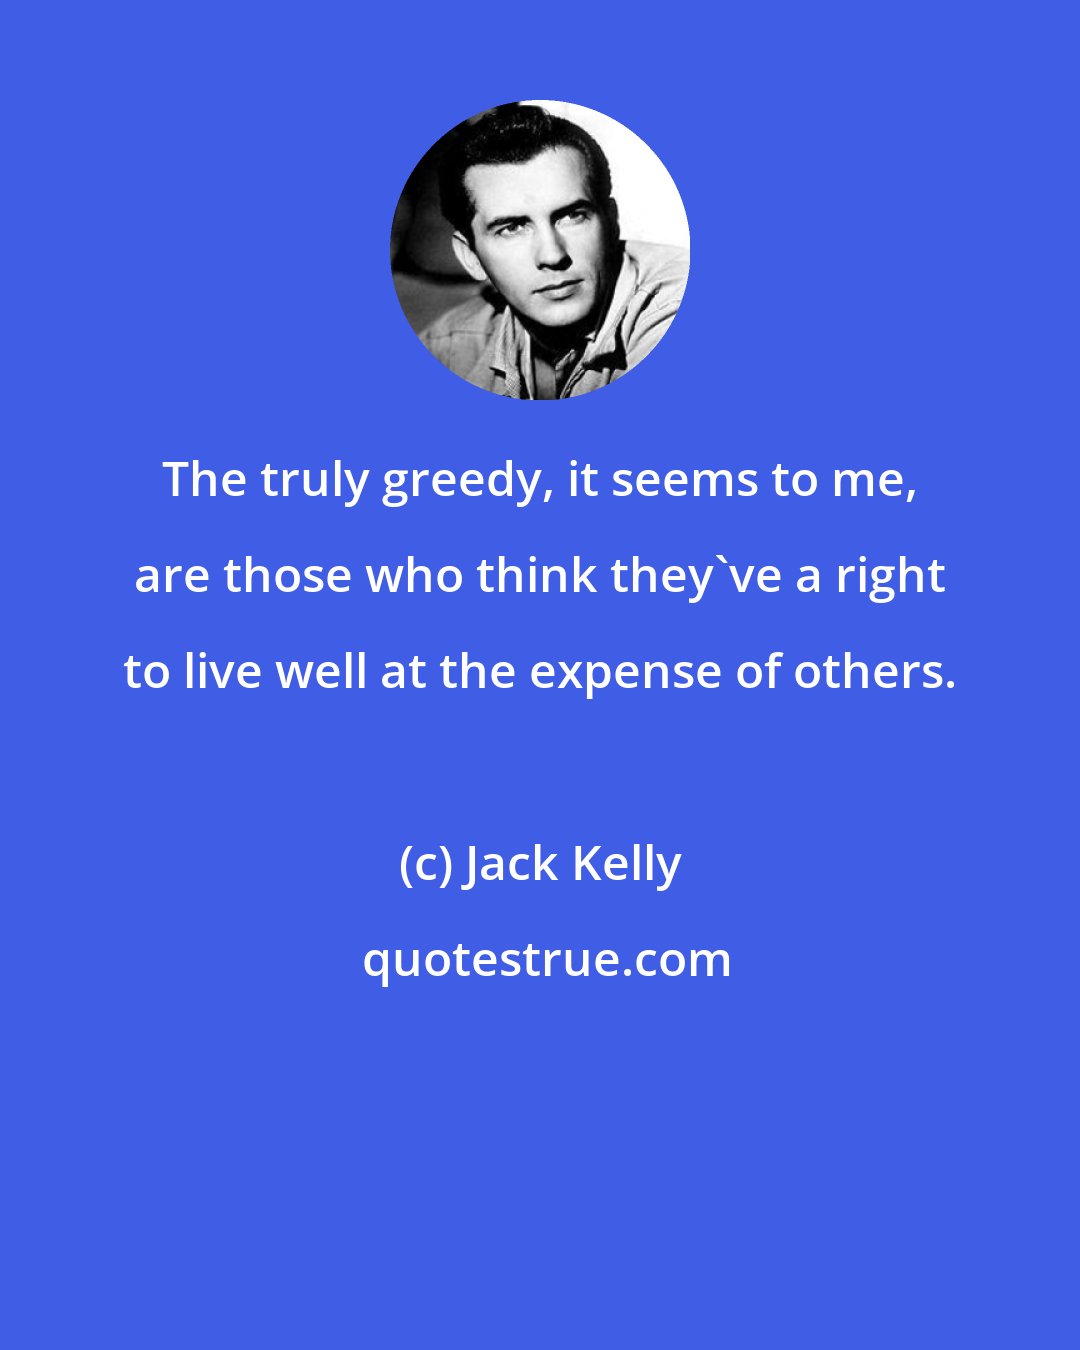 Jack Kelly: The truly greedy, it seems to me, are those who think they've a right to live well at the expense of others.